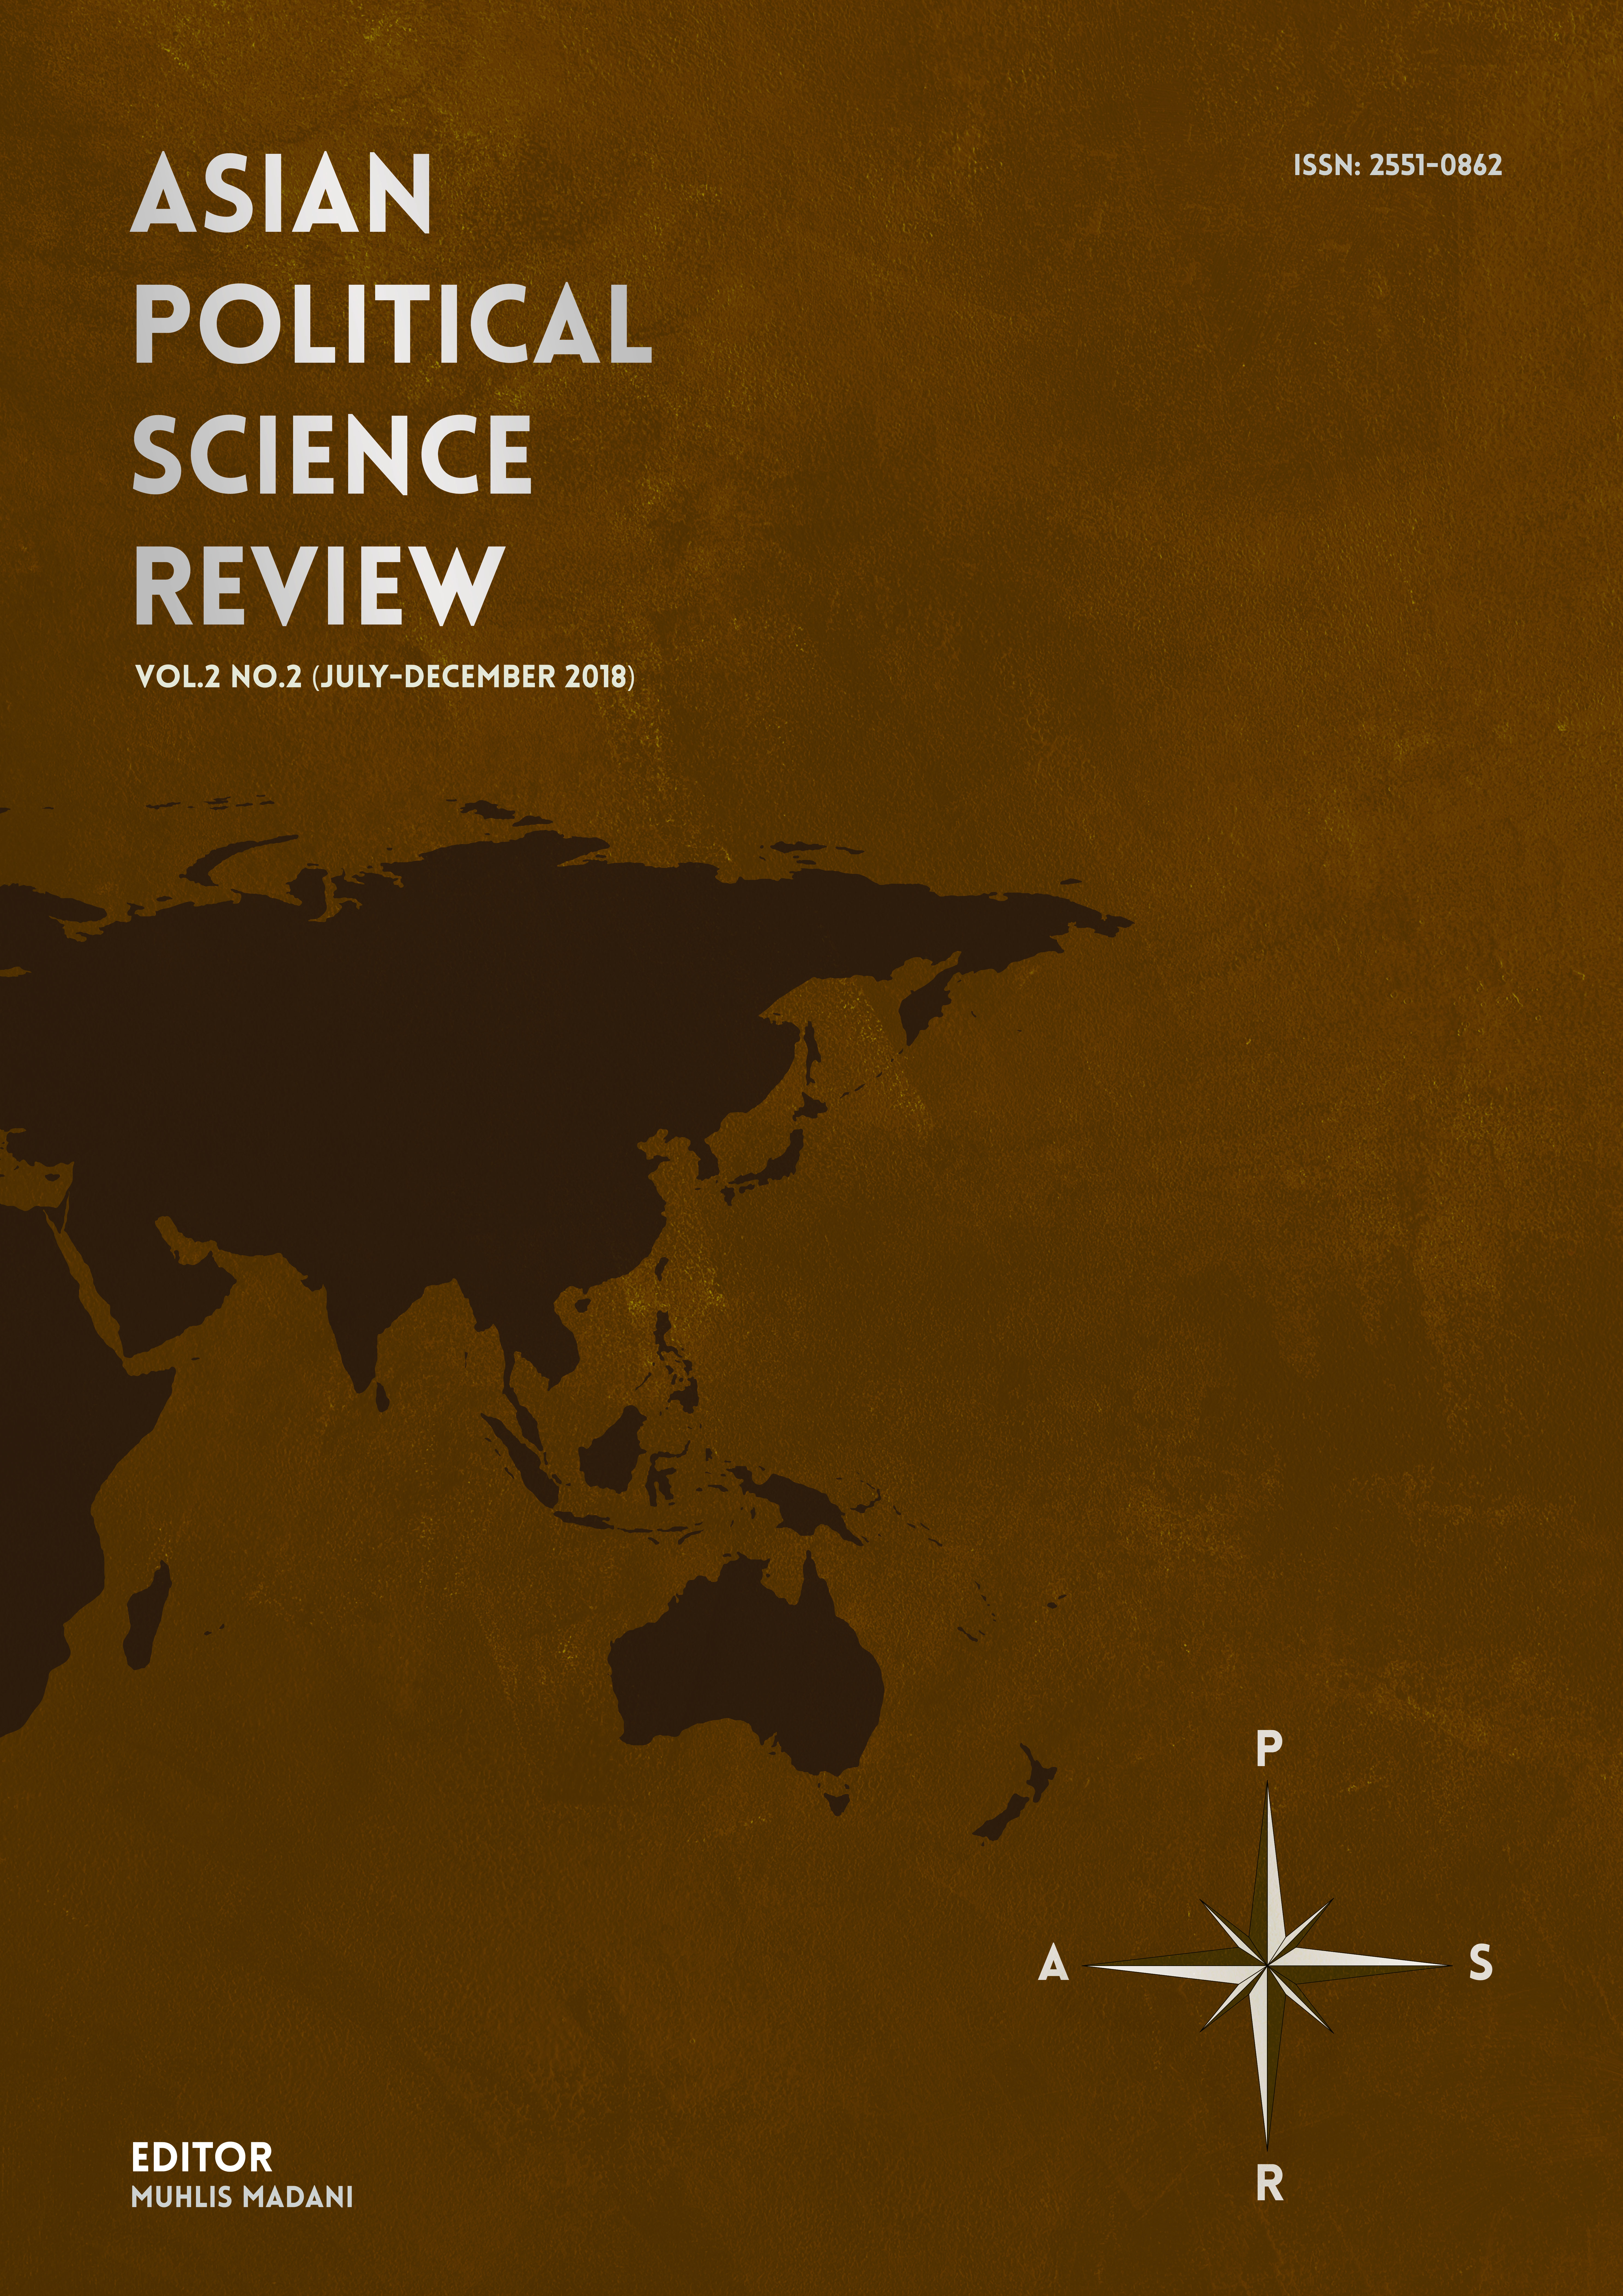 					View Vol. 2 No. 2 (2018): Asian Political Science Review
				